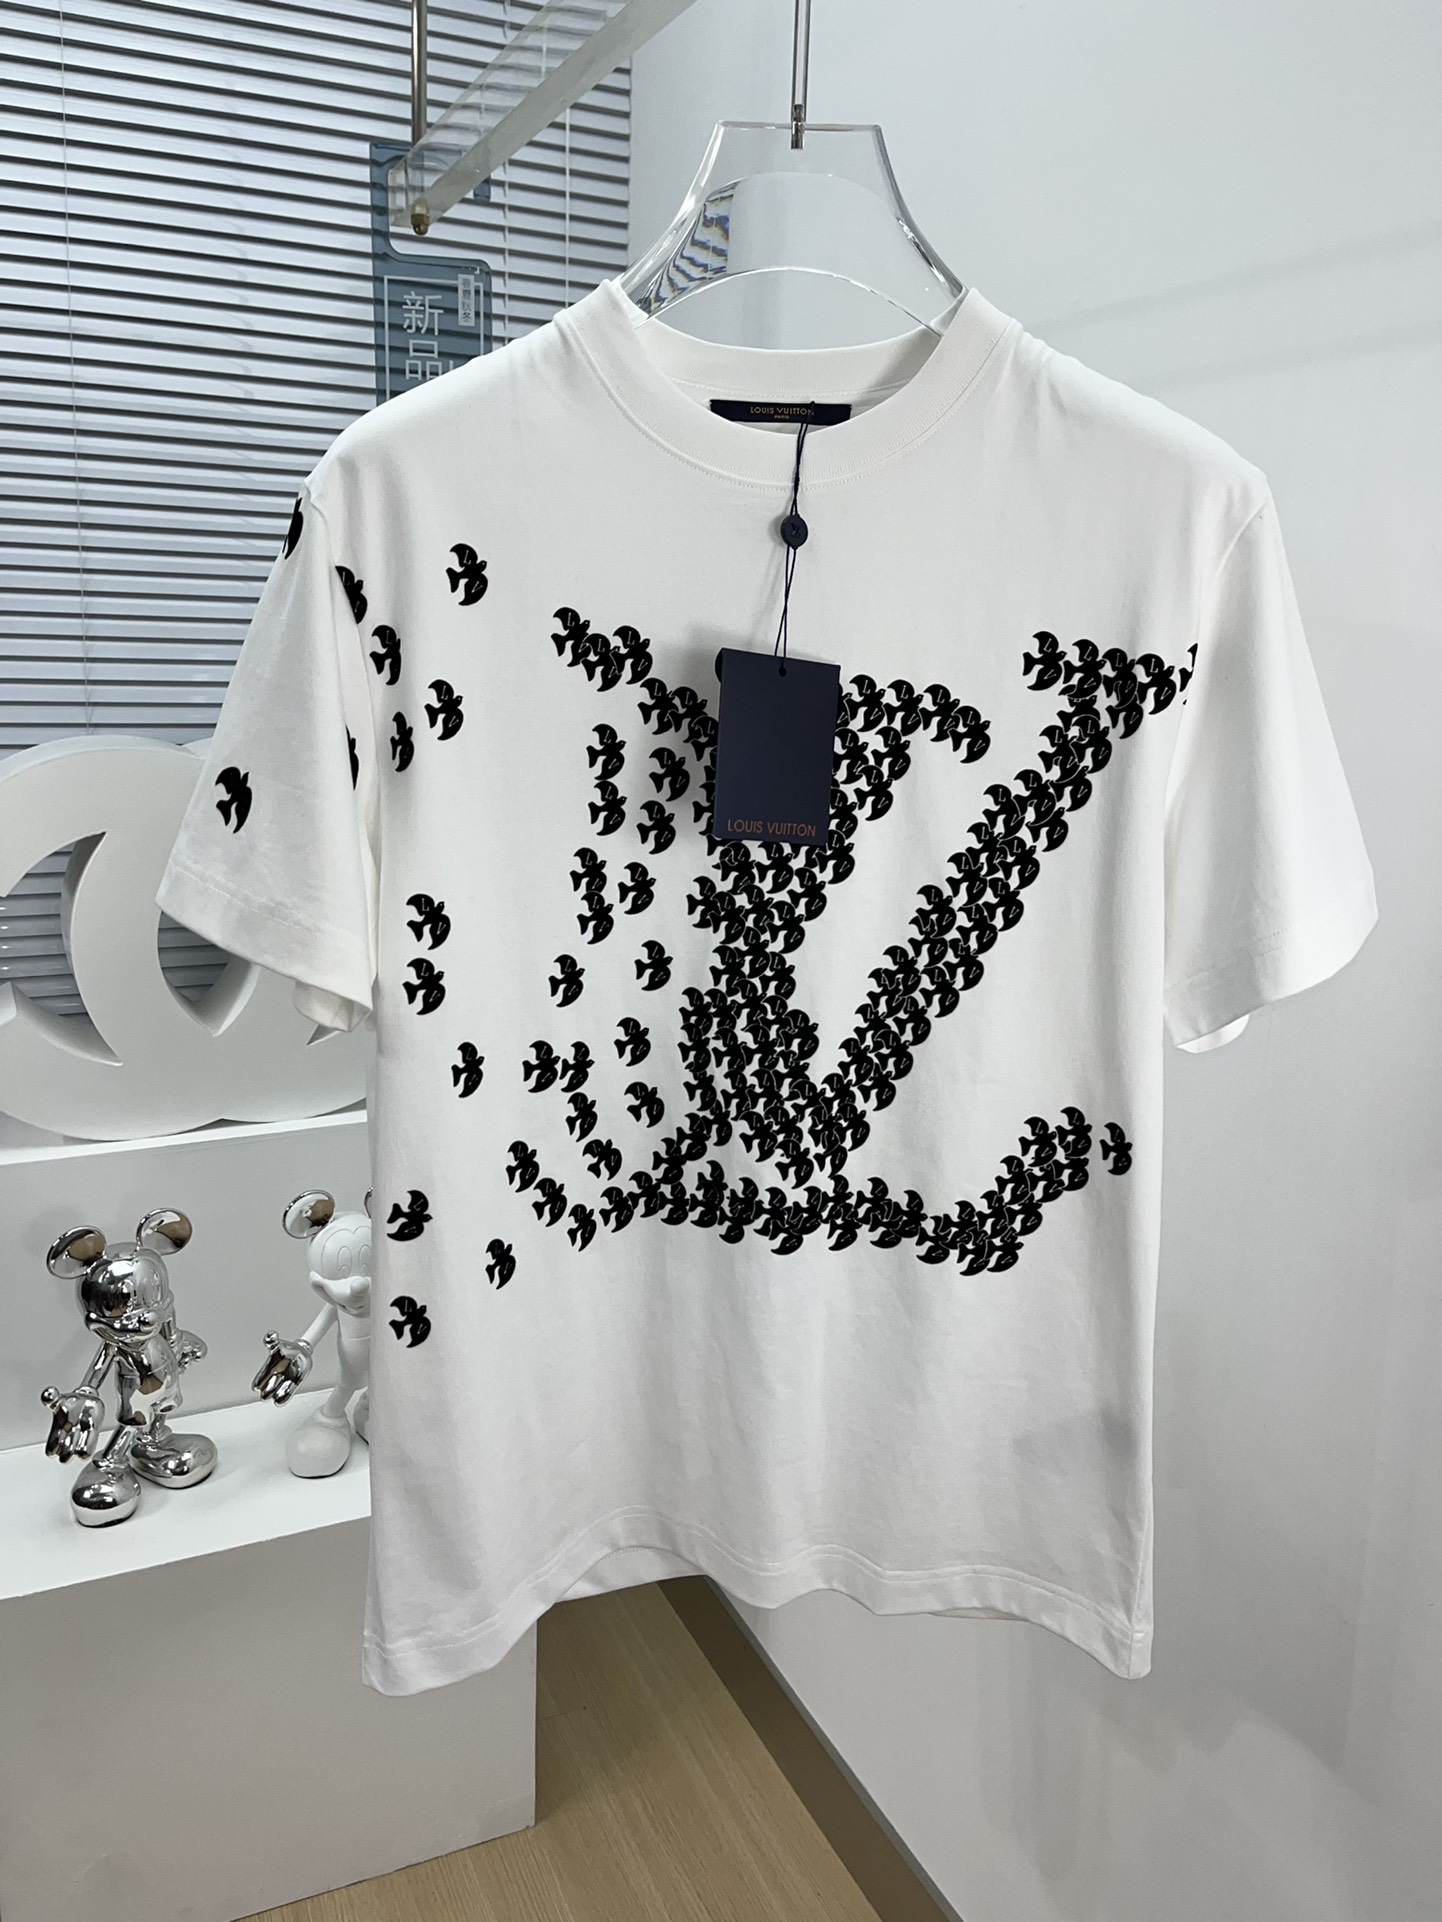 Louis Vuitton Clothing T-Shirt Black White Cotton Spring/Summer Collection Fashion Short Sleeve